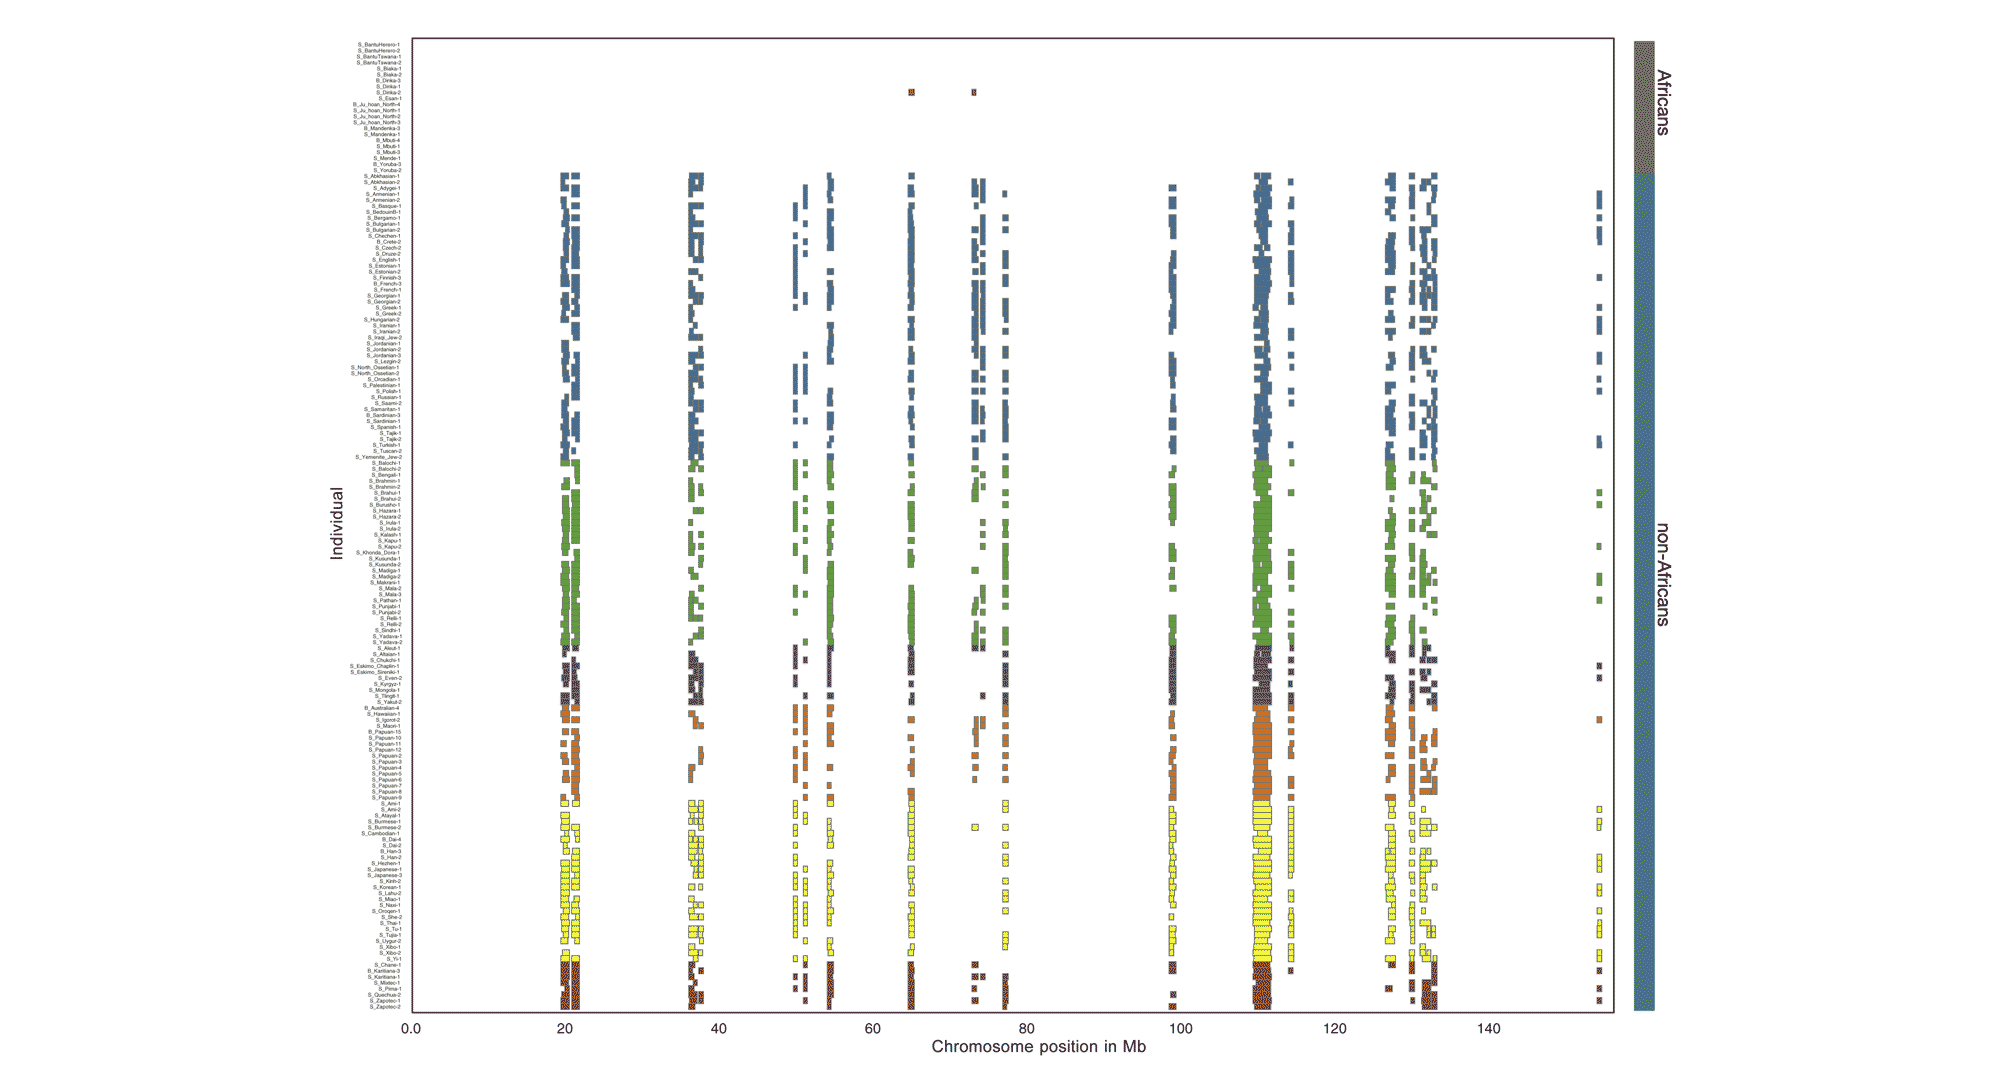 A matrix showing extended haplotypes in samples of individuals against chromosome position